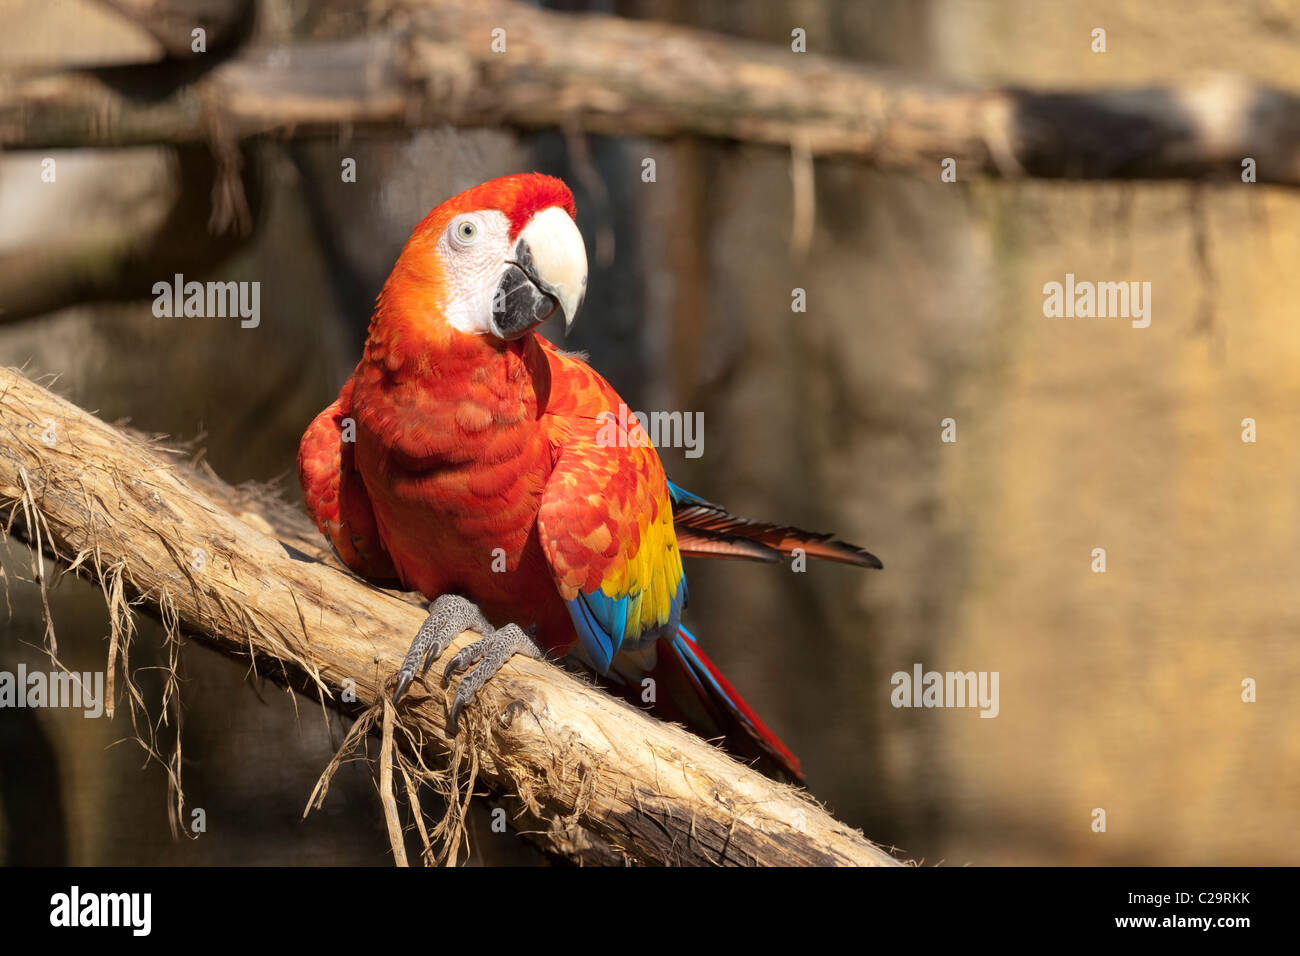 Scarlet Macaw (Ara macao). Aviary bird. Native to parts of tropical Central and South America. Endangered. Stock Photo